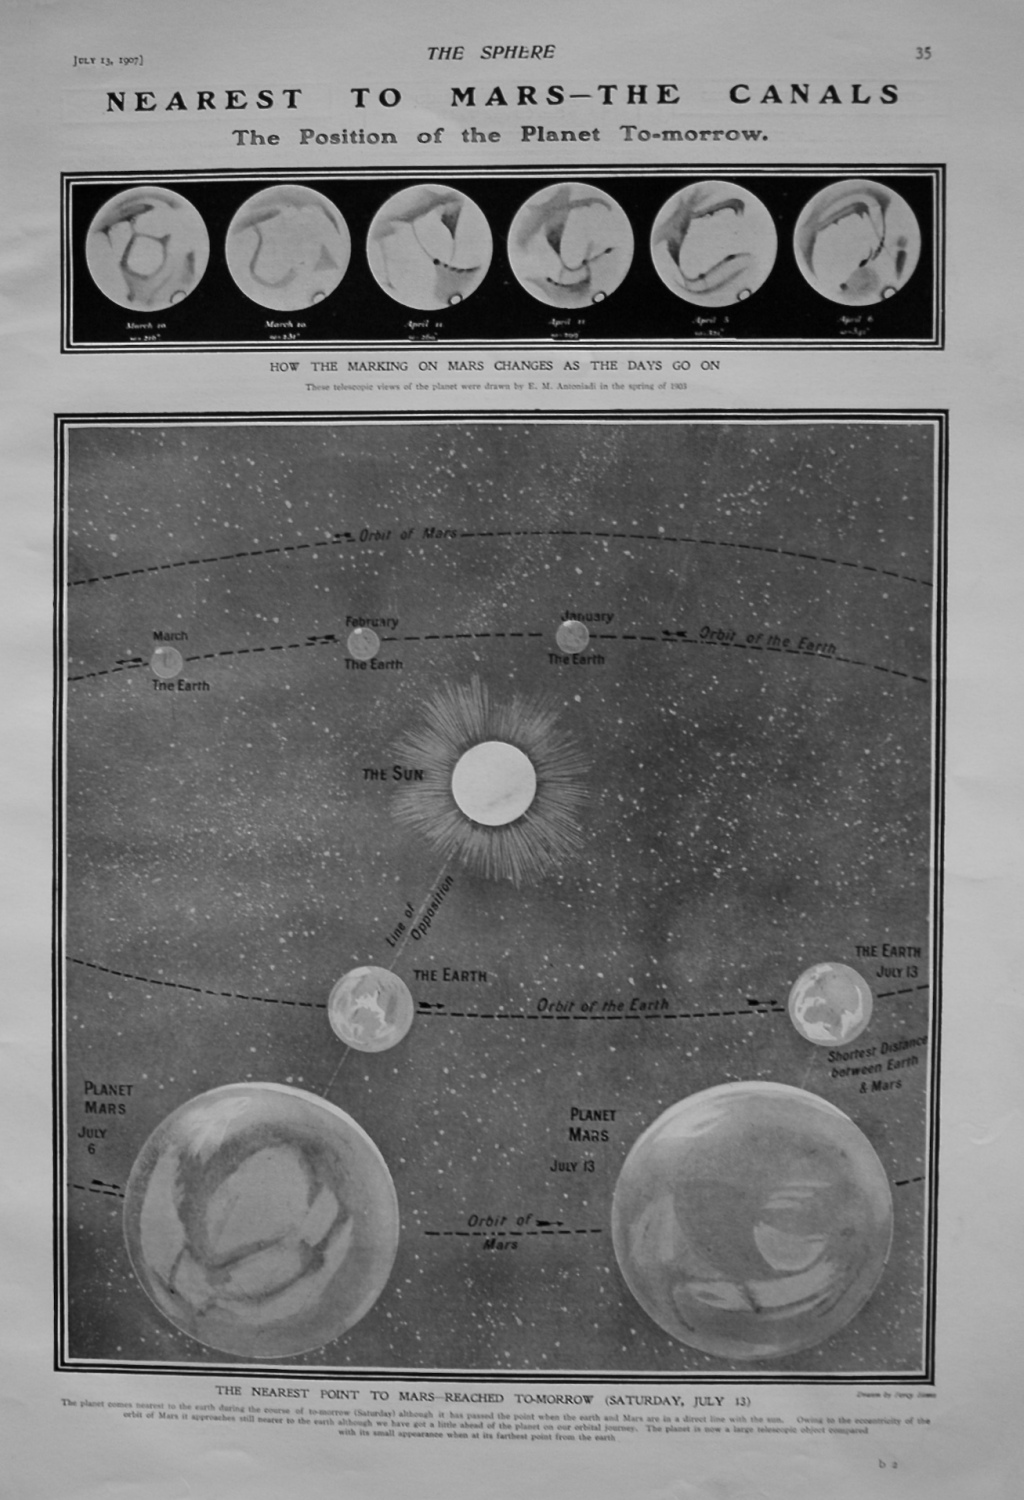 Nearest to Mars - The Canals. The Position of the Planets To-morrow. 1907